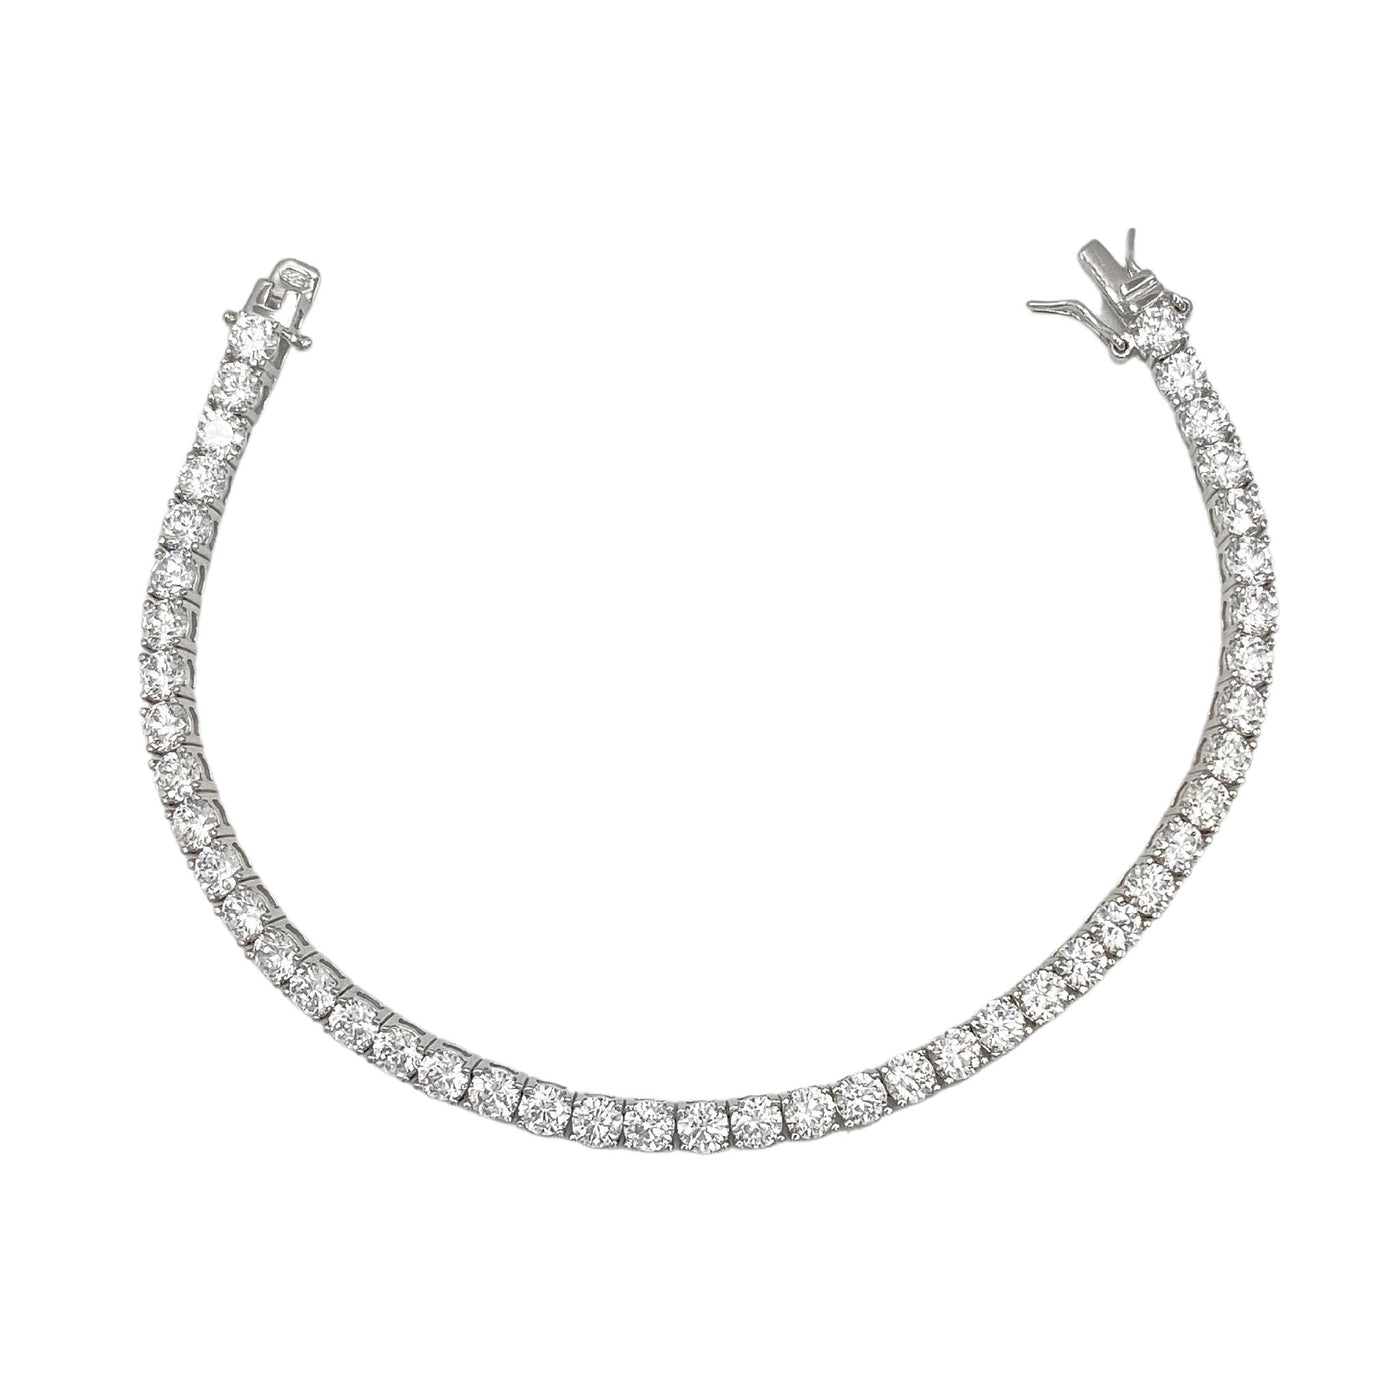 Silver casting tennis bracelet with white round stones - 4 mm